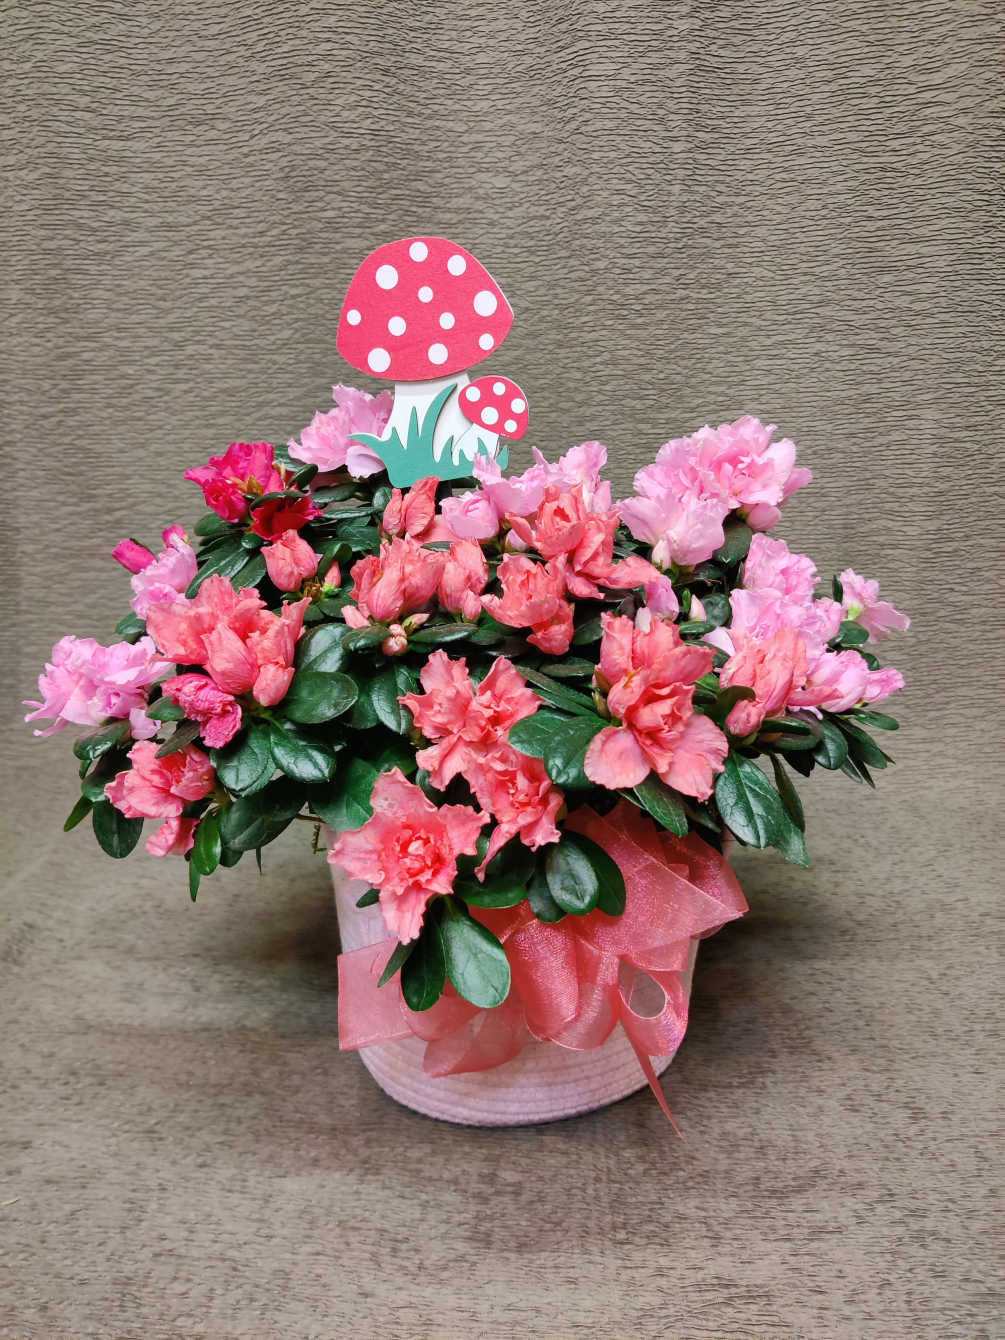 Perennial plant for the garden. Dressed in a cute pink cloth basket